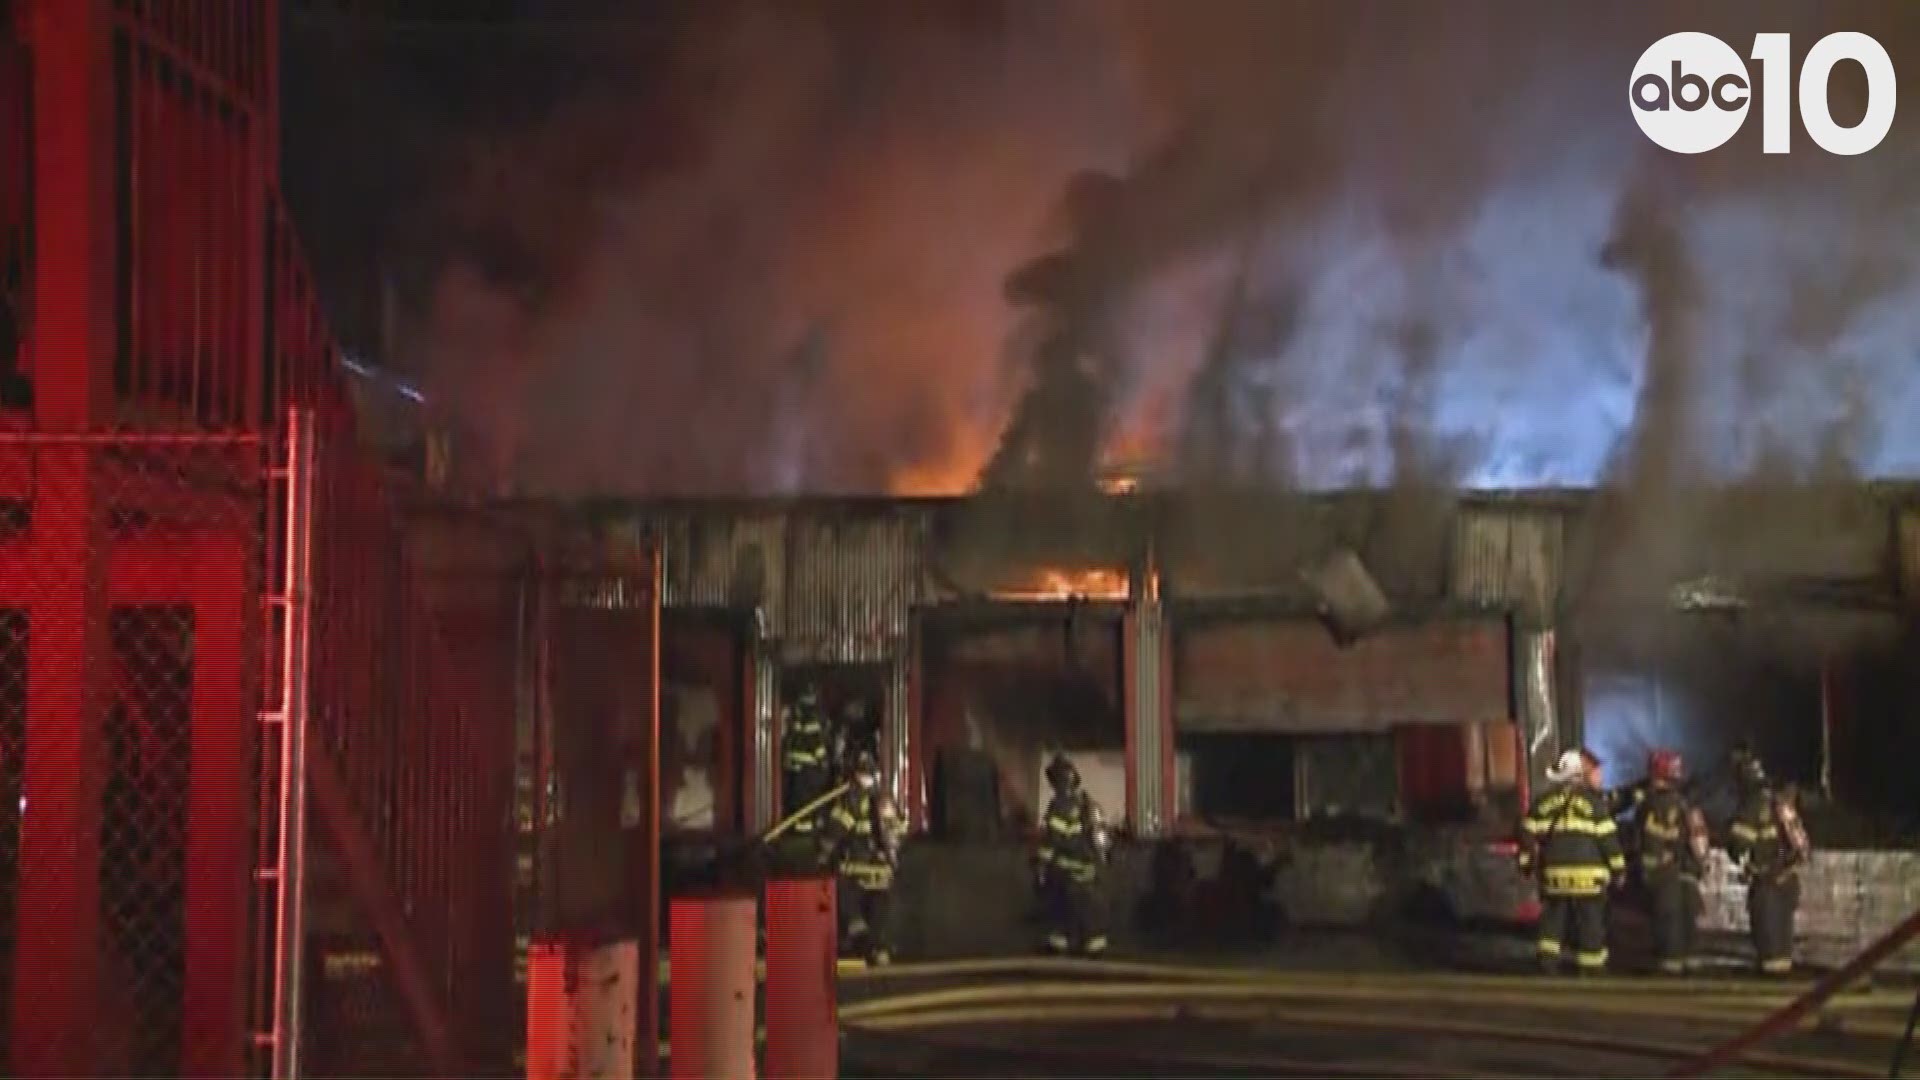 More than 100 fire fighters are working to suppress a four-alarm building fire early Thursday morning in an industrial area of downtown Sacramento.